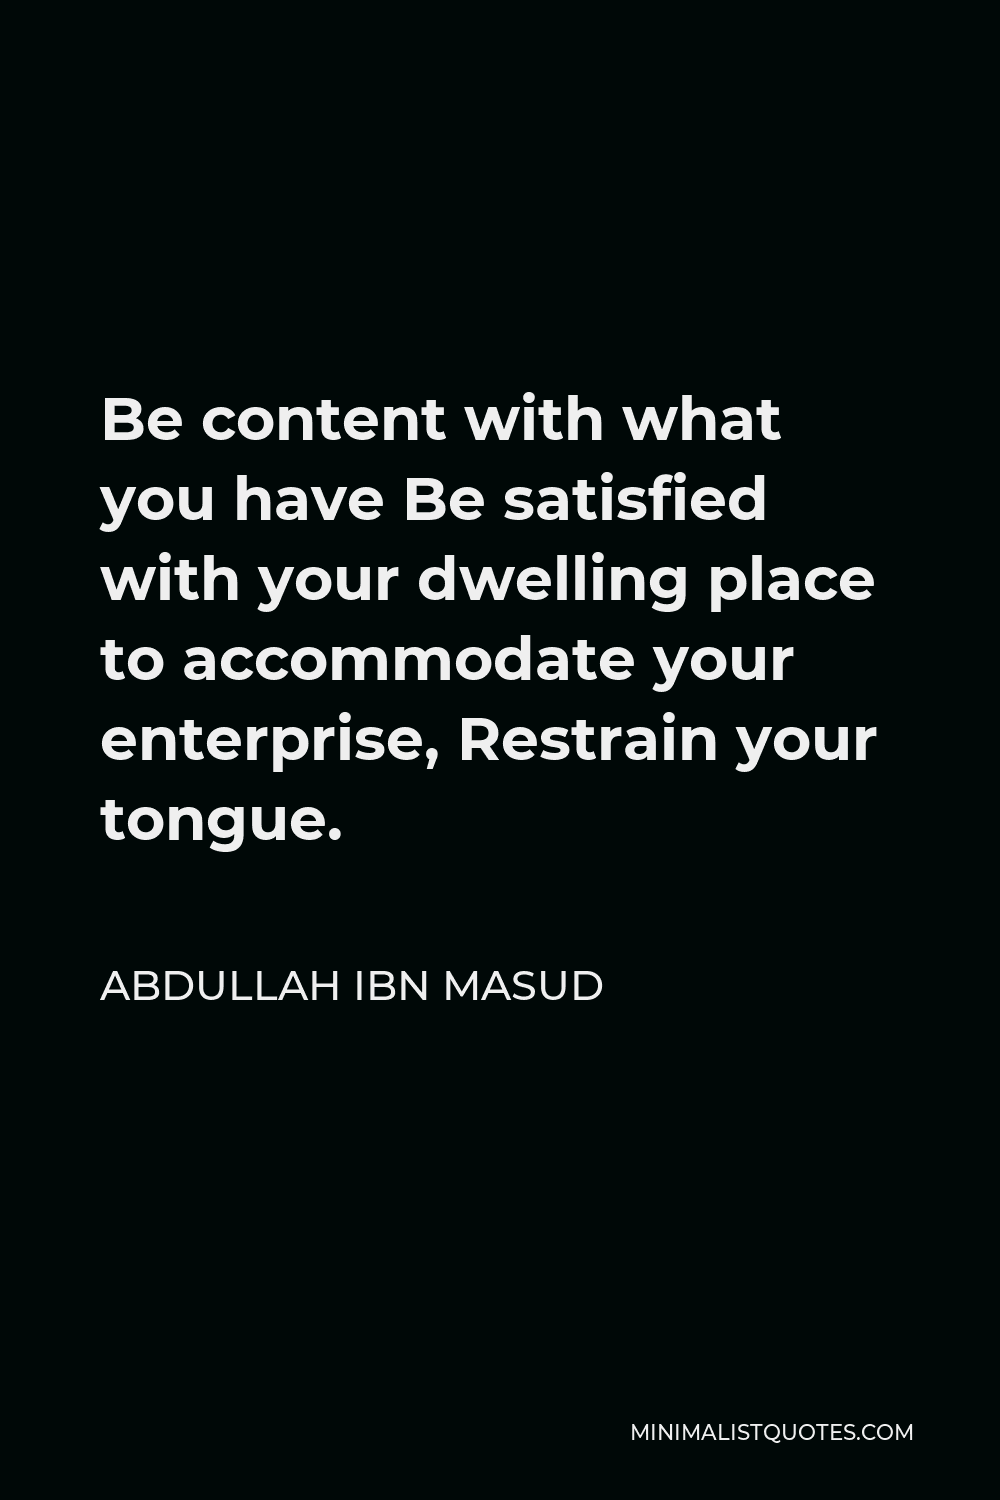 Abdullah ibn Masud Quote - Be content with what you have Be satisfied with your dwelling place to accommodate your enterprise, Restrain your tongue.